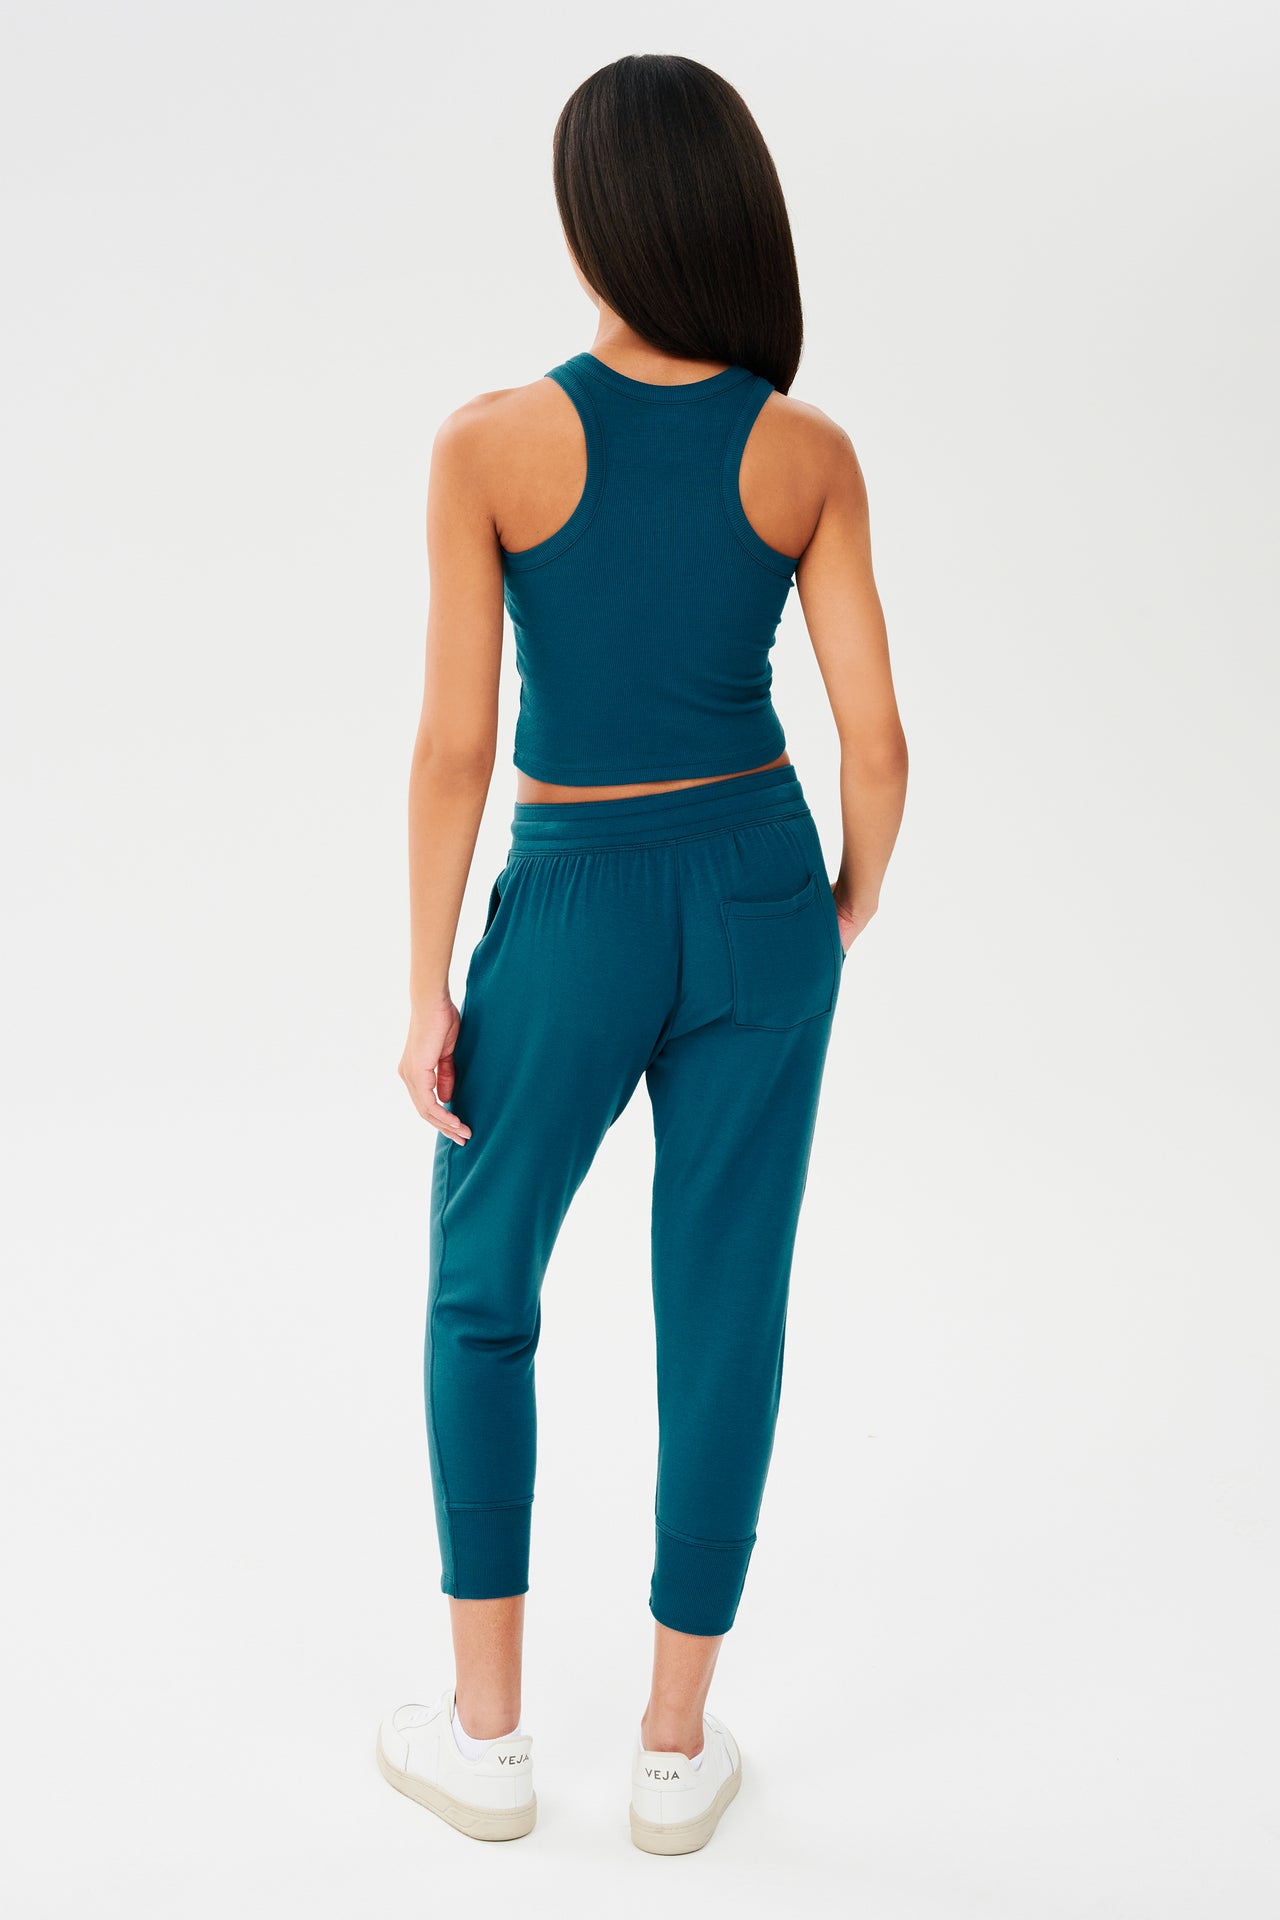 The back view of a woman wearing teal joggers and a SPLITS59 Kiki Rib Crop Tank in Peacock at the gym.